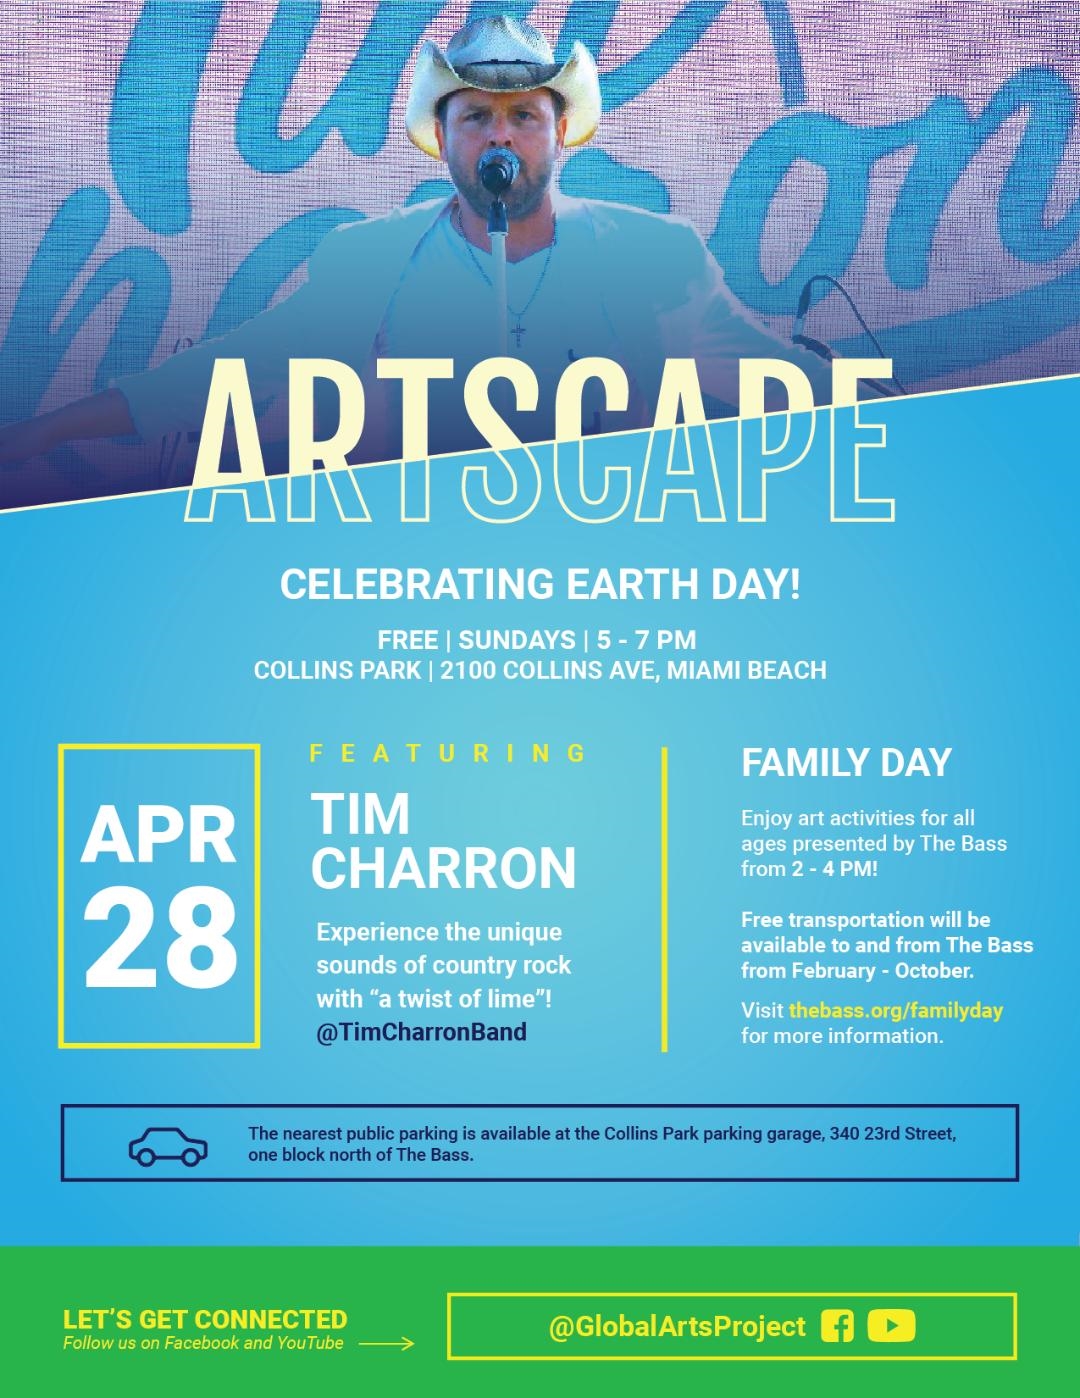 Celebrate Earth Day with Tim Charron in Collins Park!